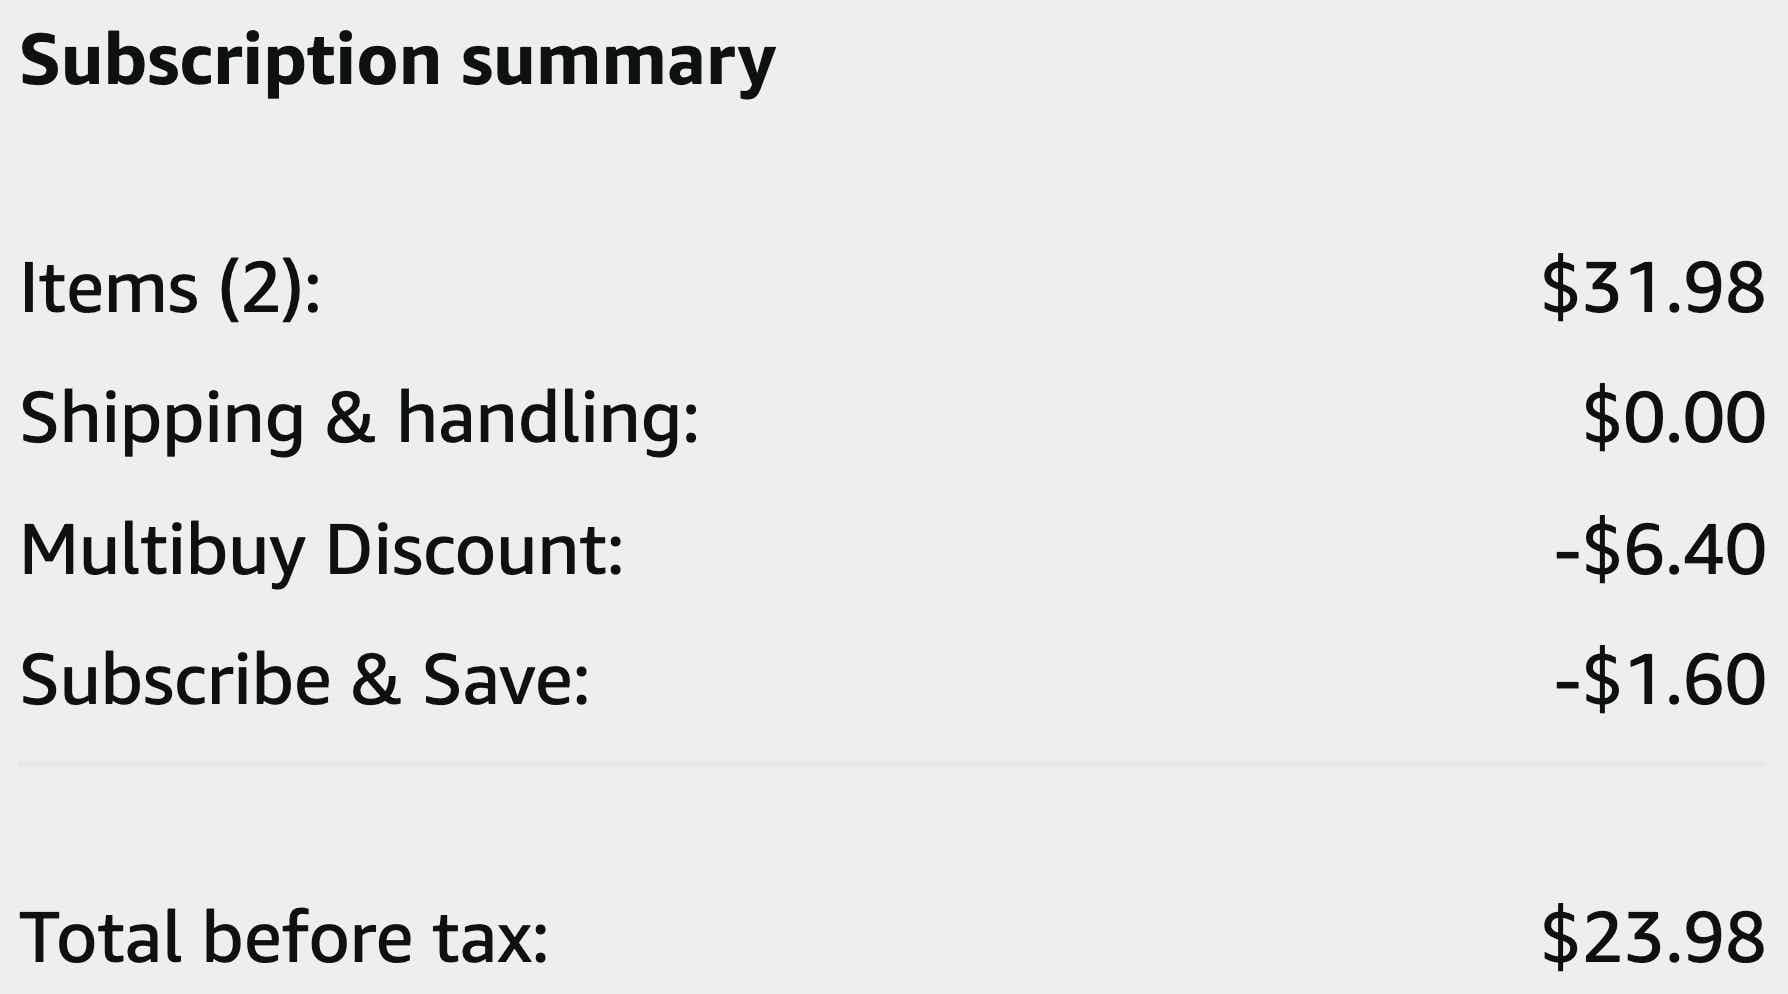 amazon order summary showing savings and total